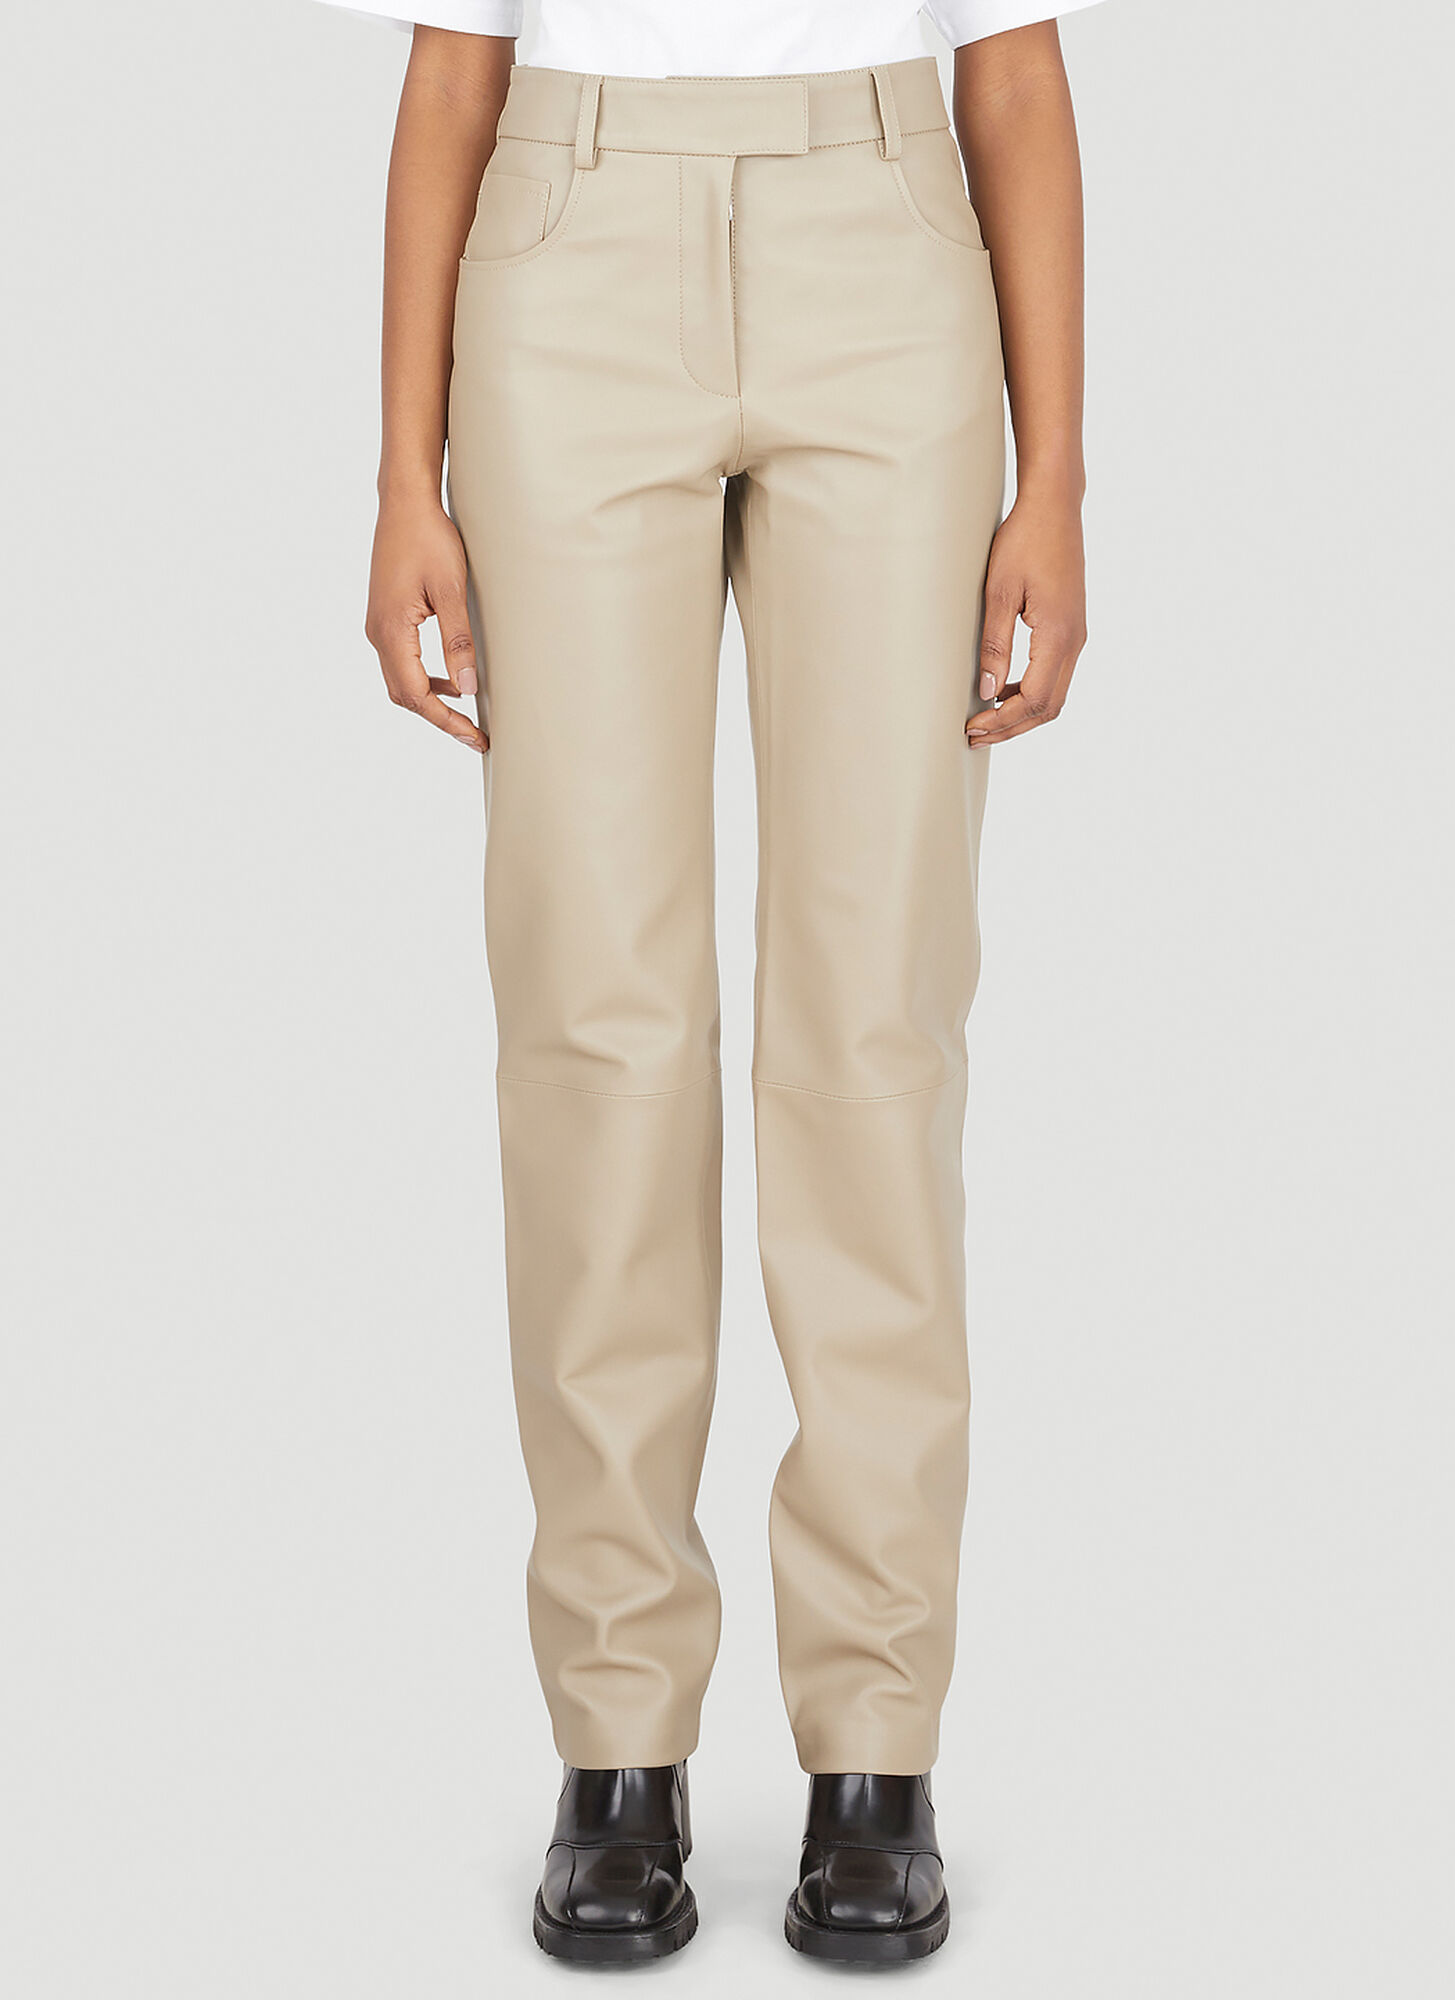 Common Leisure Power Suit Trousers In Beige